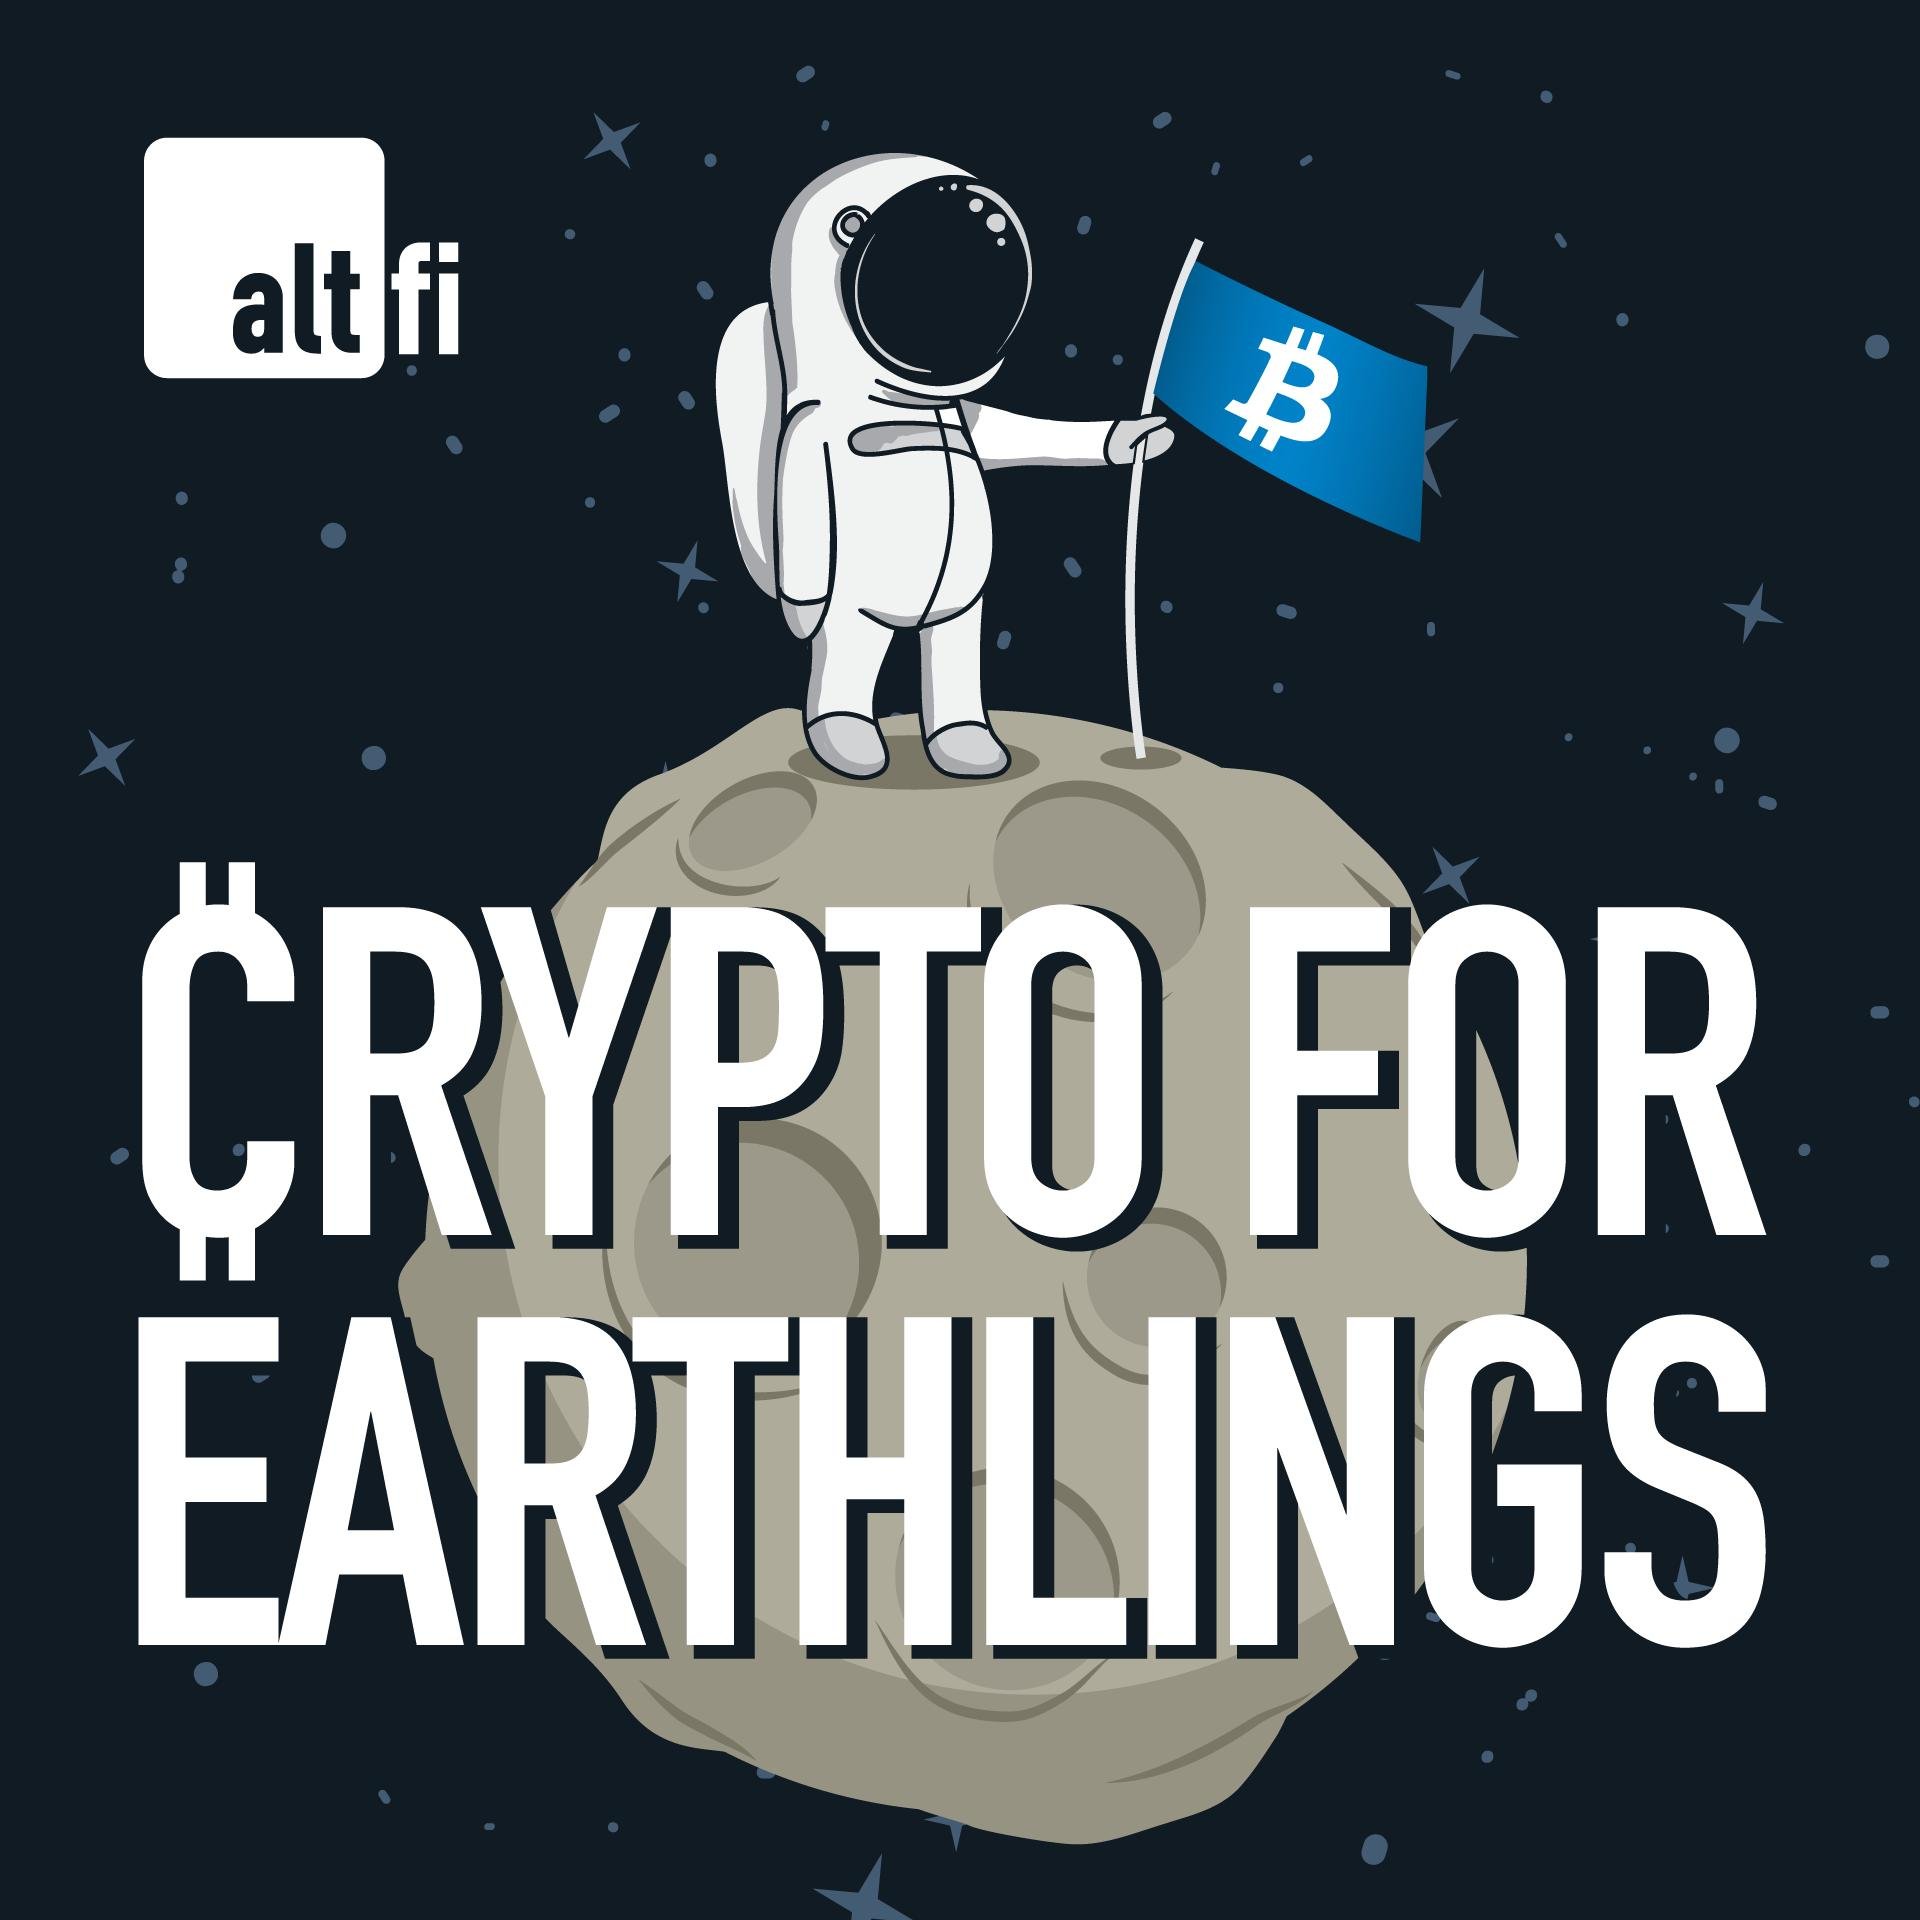 A new six-part podcast series where @OliverSmithEU and @advinvestor unpack and explain the ever-more confusing world of crypto. Brought to you by @AltFiNews.